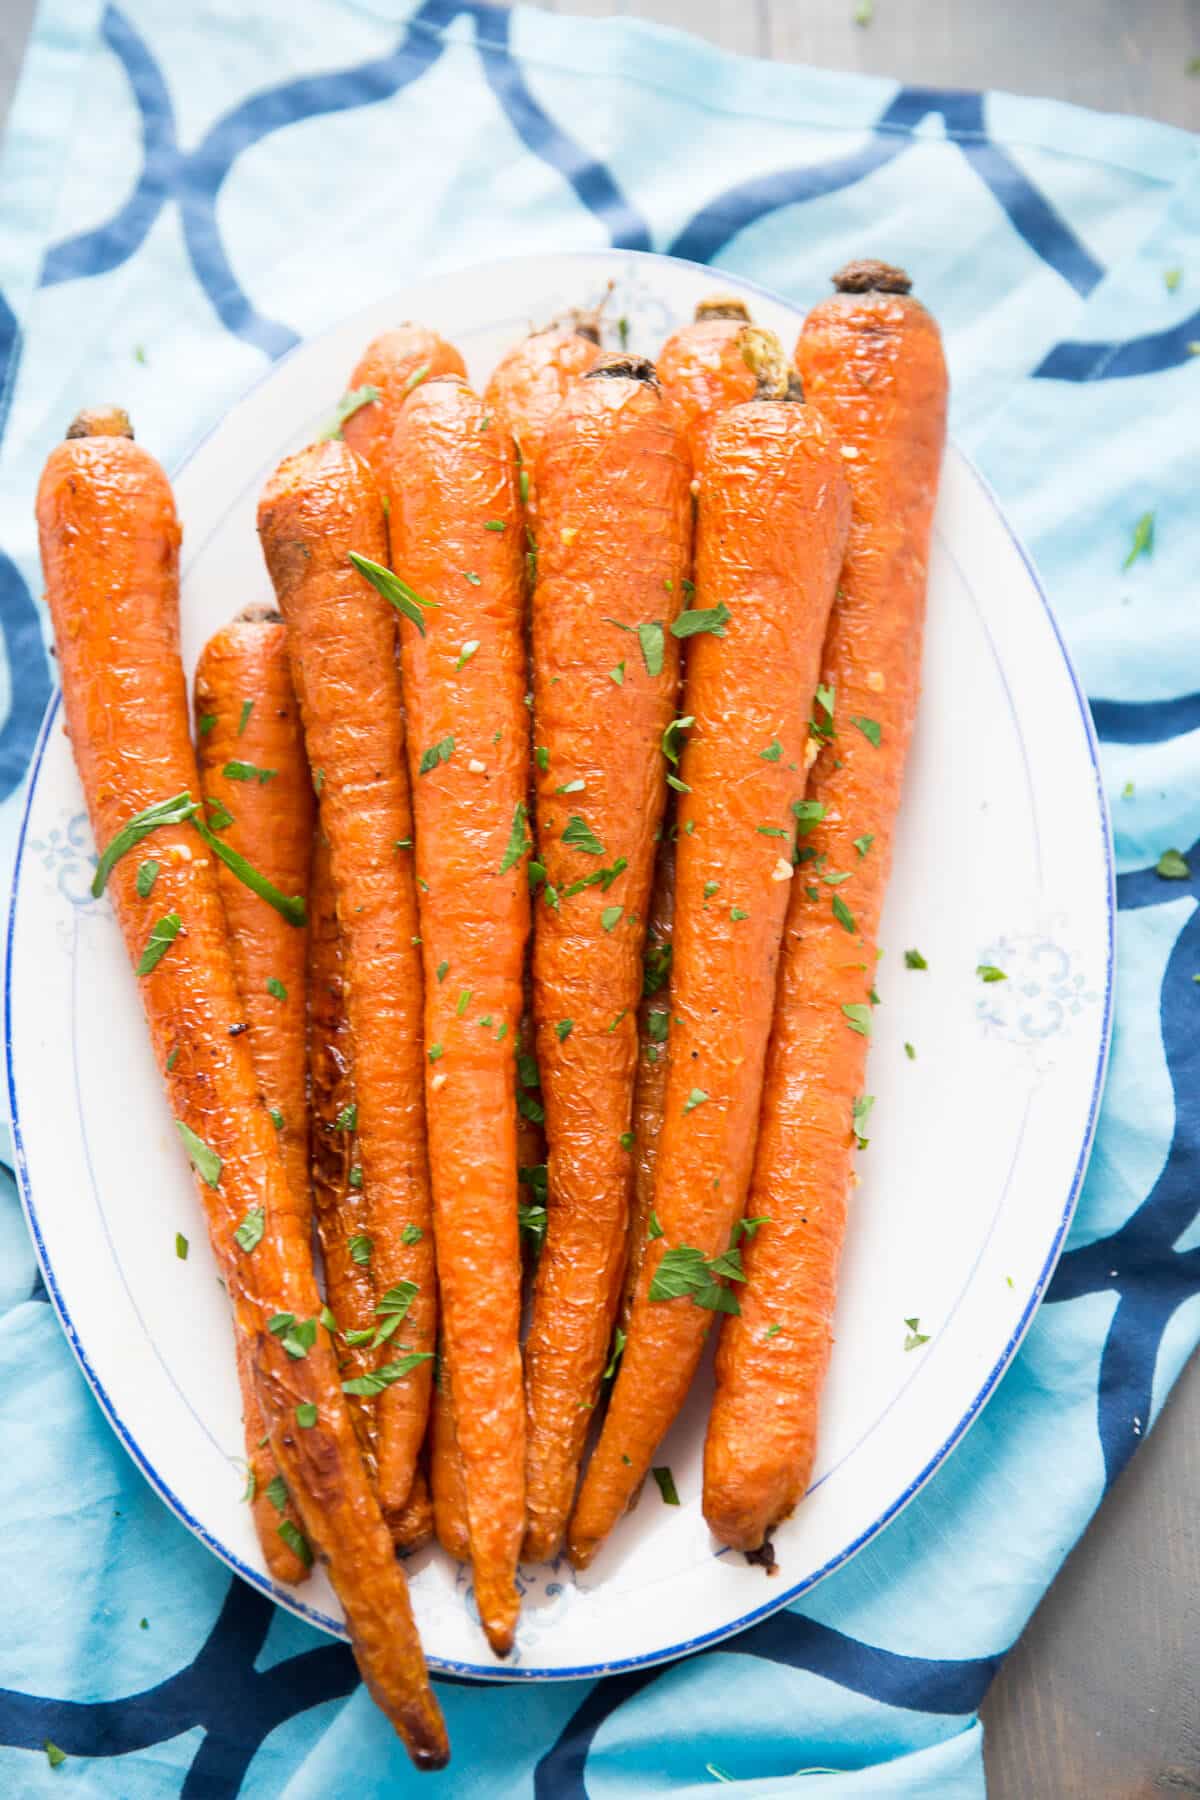 Oven Roasted Carrots with Garlic and Parsley | LemonsforLulu.com